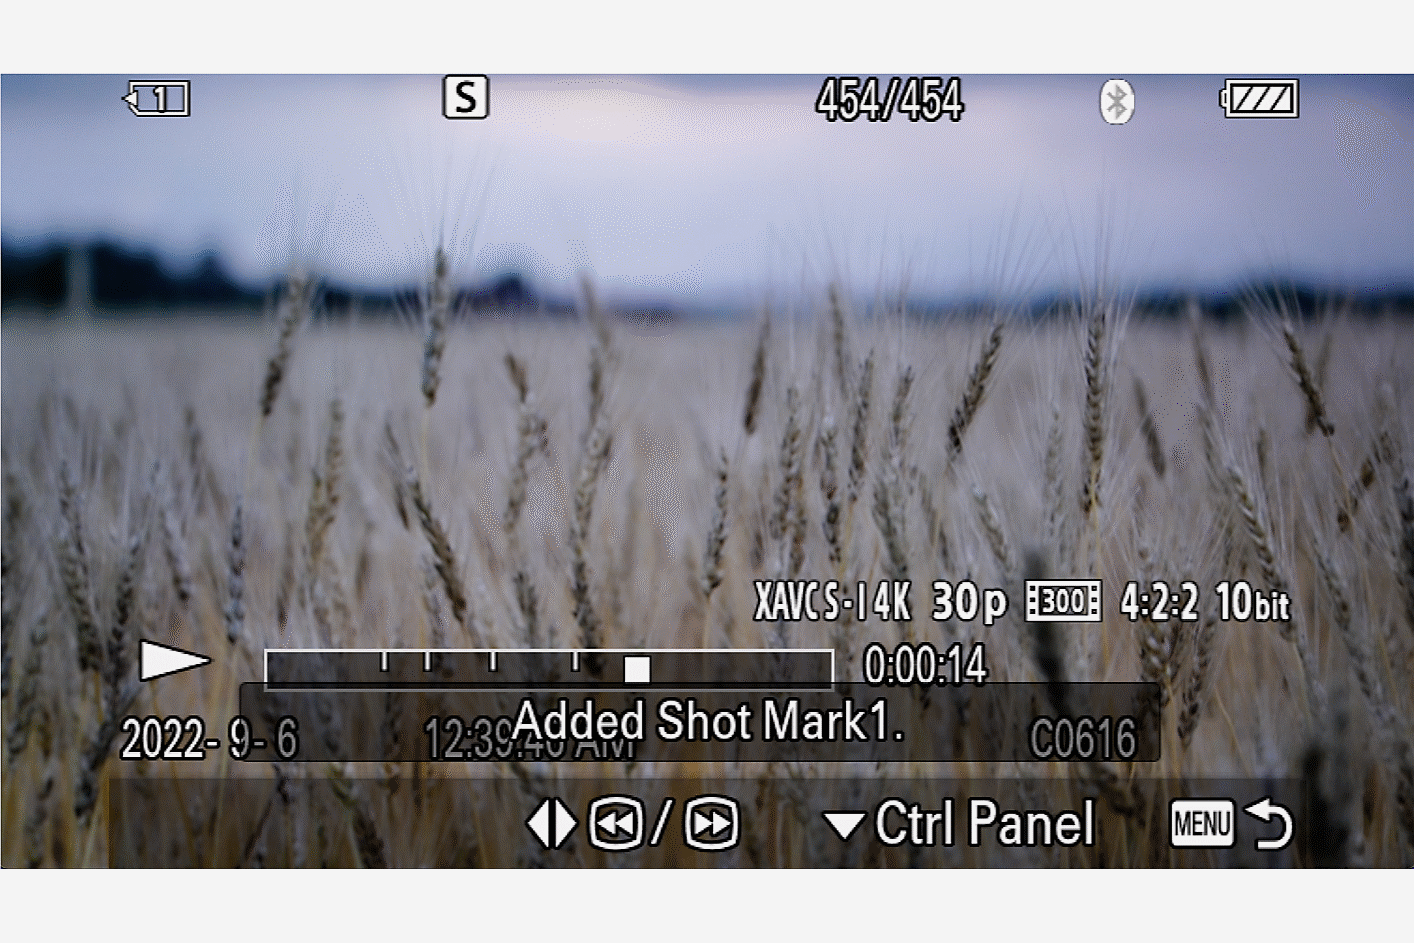 Camera display showing a barley field, with superimposed text indicating that a Shot Mark has been set